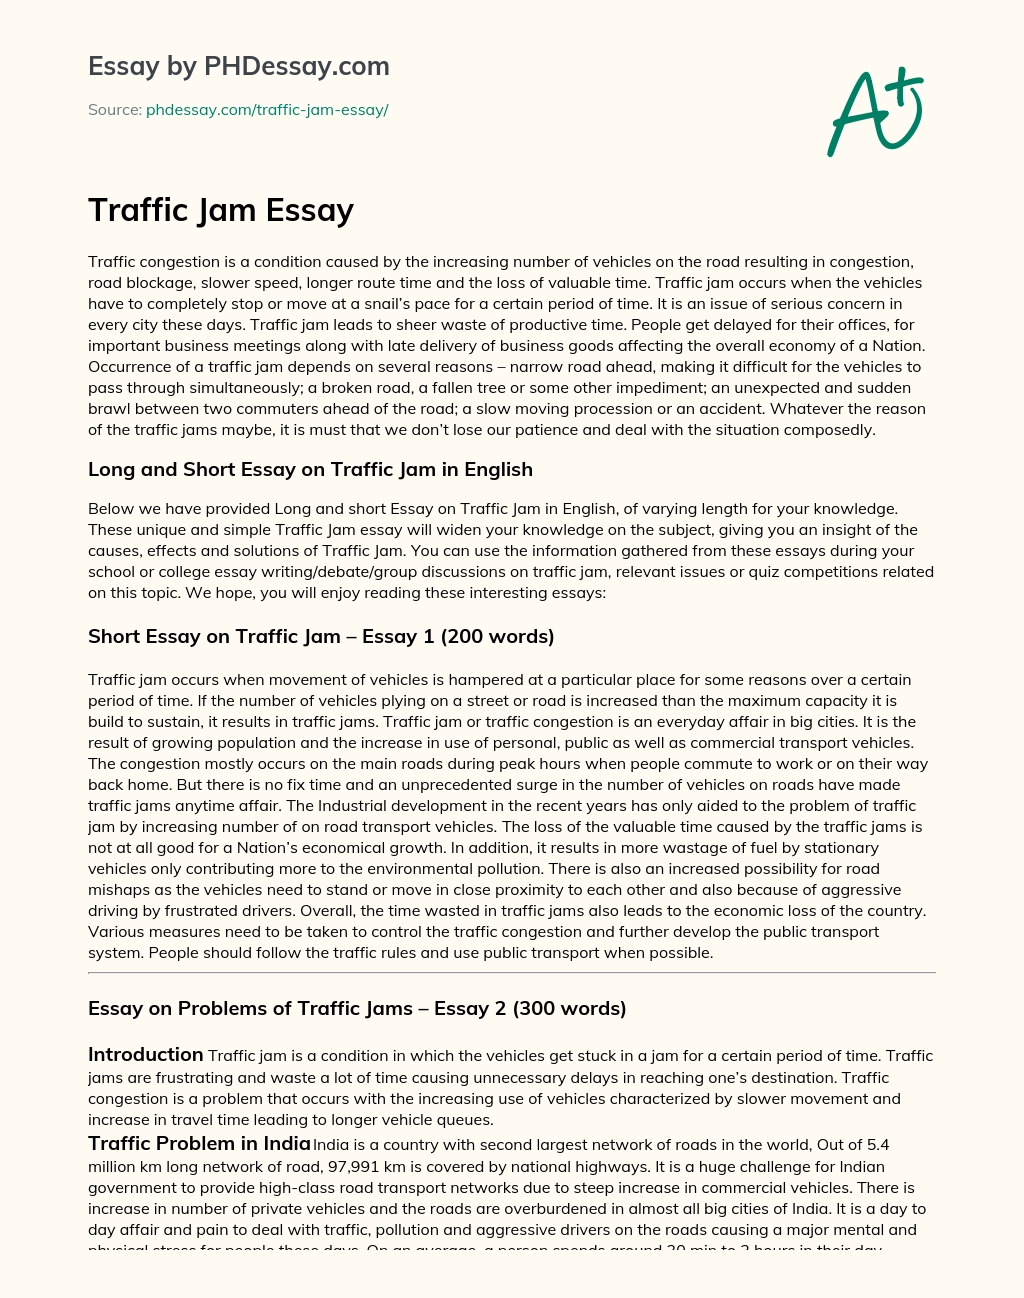 The Negative Impact of Traffic Congestion on Society and Economy essay